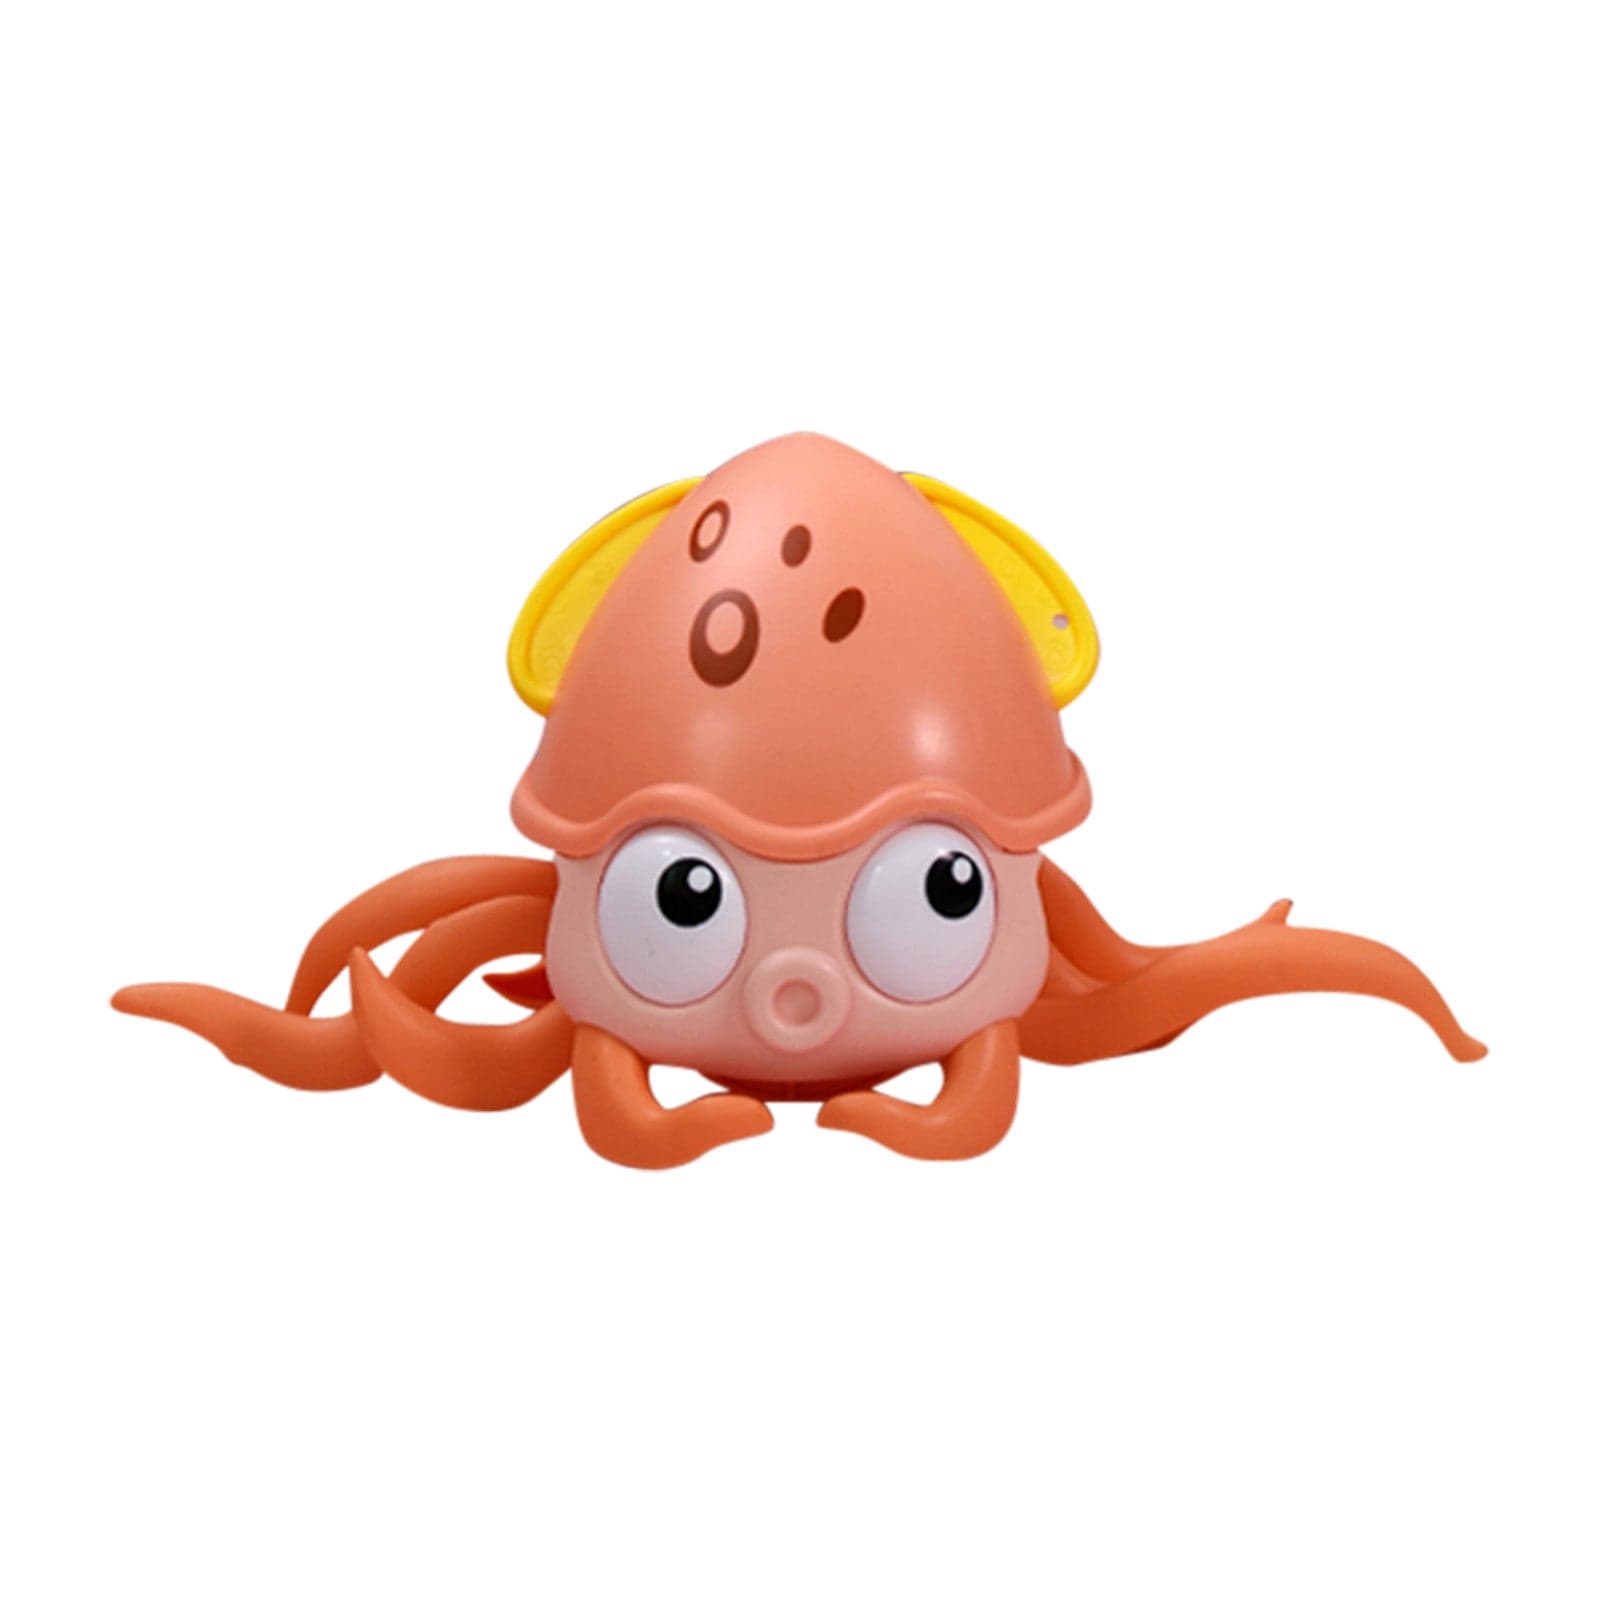 Cute Octopus Toys For Children - www.mytooluse.com